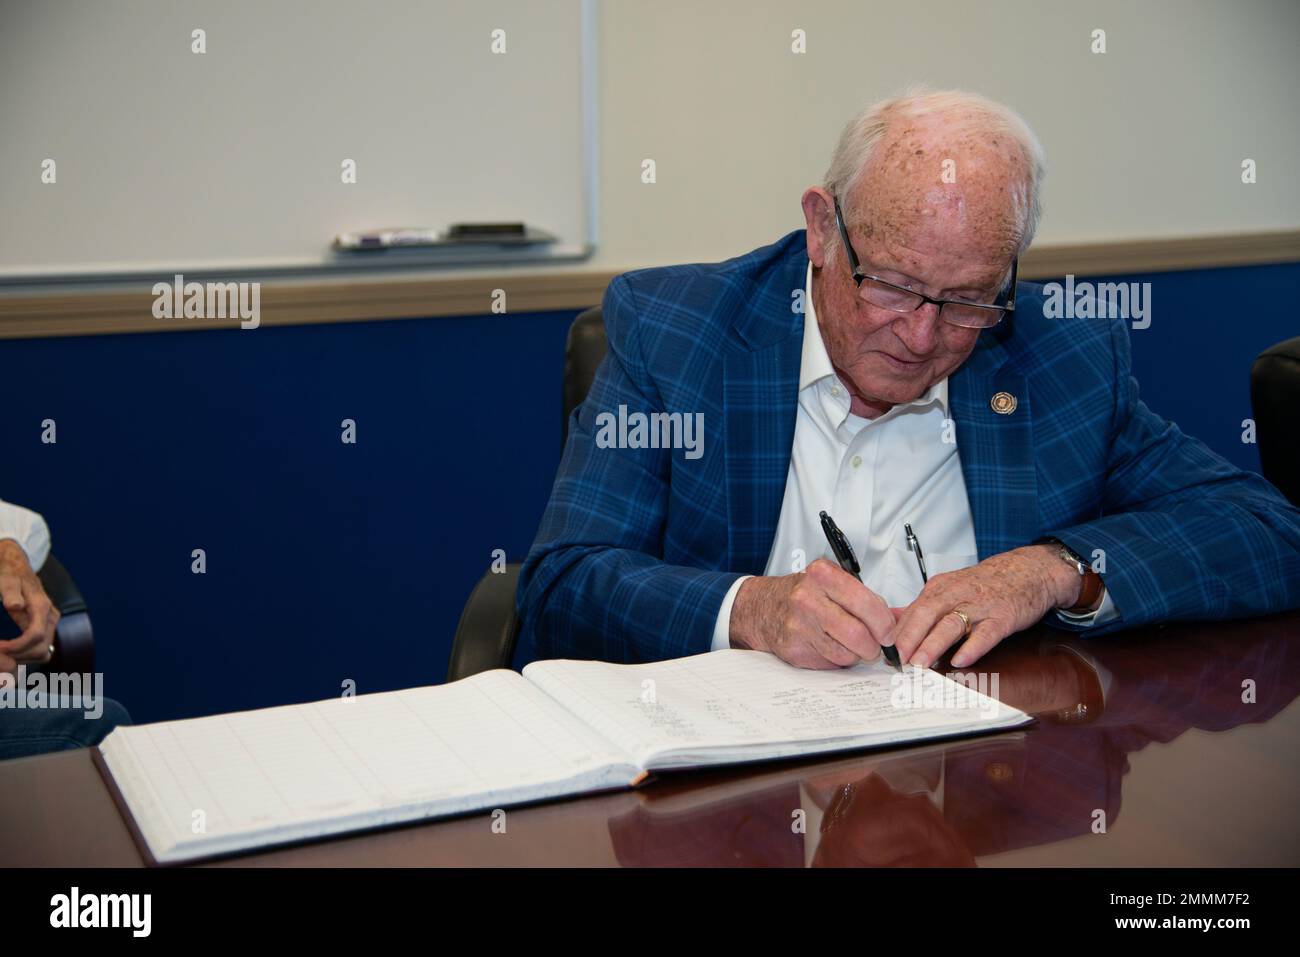 NEWPORT, R.I. (Sept. 20, 2022) Retired U.S. Navy Cmdr. George Easley, first director of the Senior Enlisted Academy (SEA), signs the SEA visitors log after his interview with Naval History and Heritage Command (NHHC) historians, Sept. 20, 2022. NHHC strives to preserve and present an accurate history by locating, collecting, and preserving documents, artifacts, photos, oral histories, and art that best represent the history of the U.S. Navy. Stock Photo